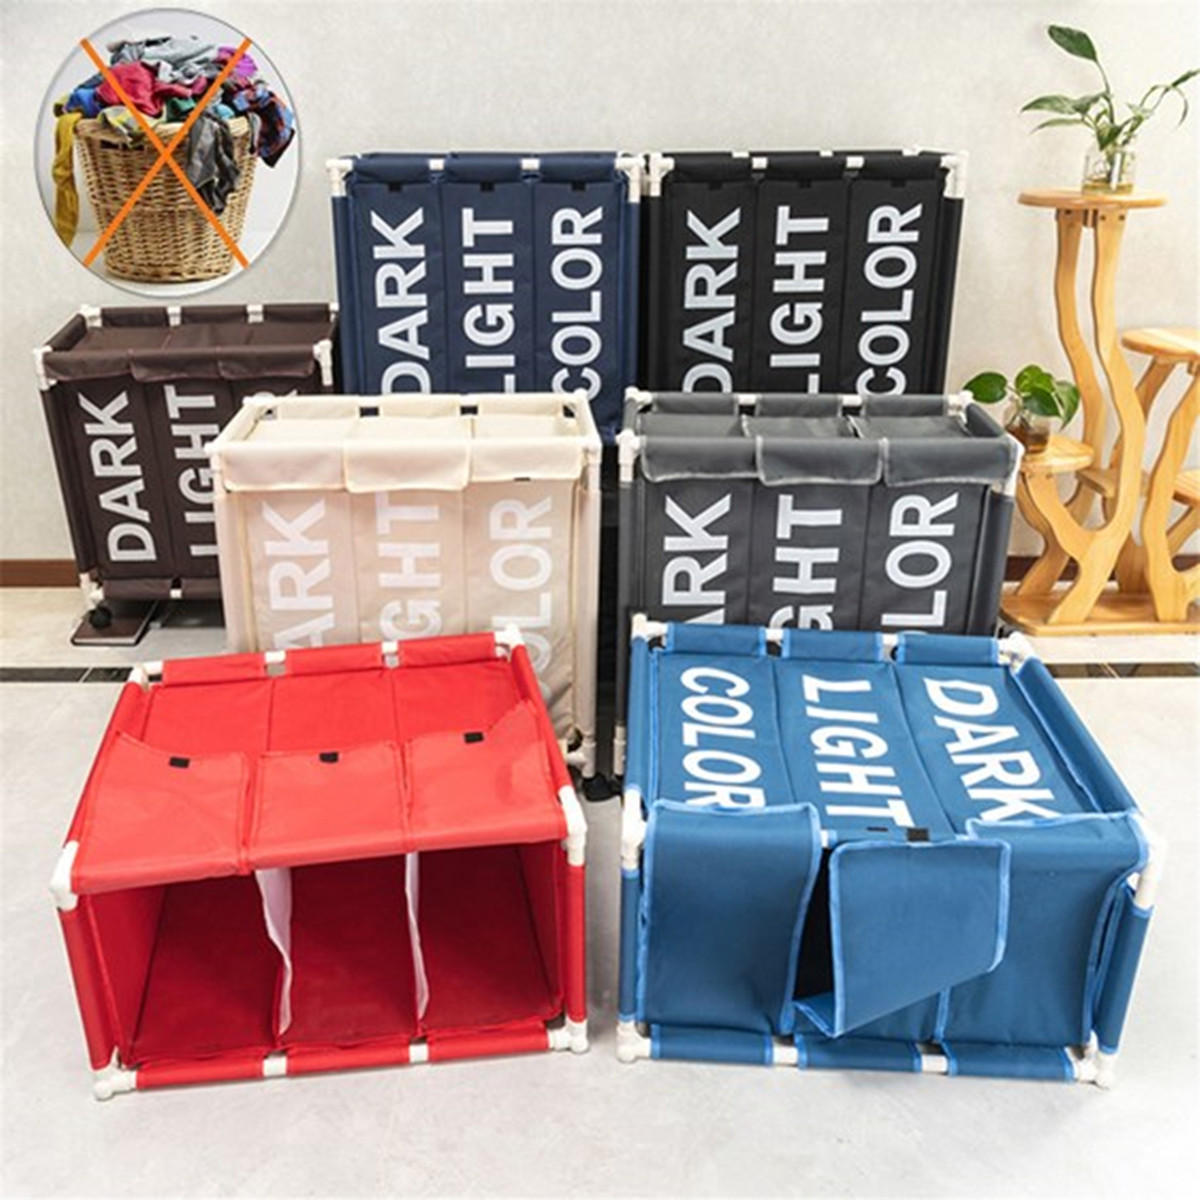 

Rolling Laundry Basket Organizer 3 Grid Large Laundry Hamper Bin Waterproof Laundry Bags For Dirty Clothes Storage Box B